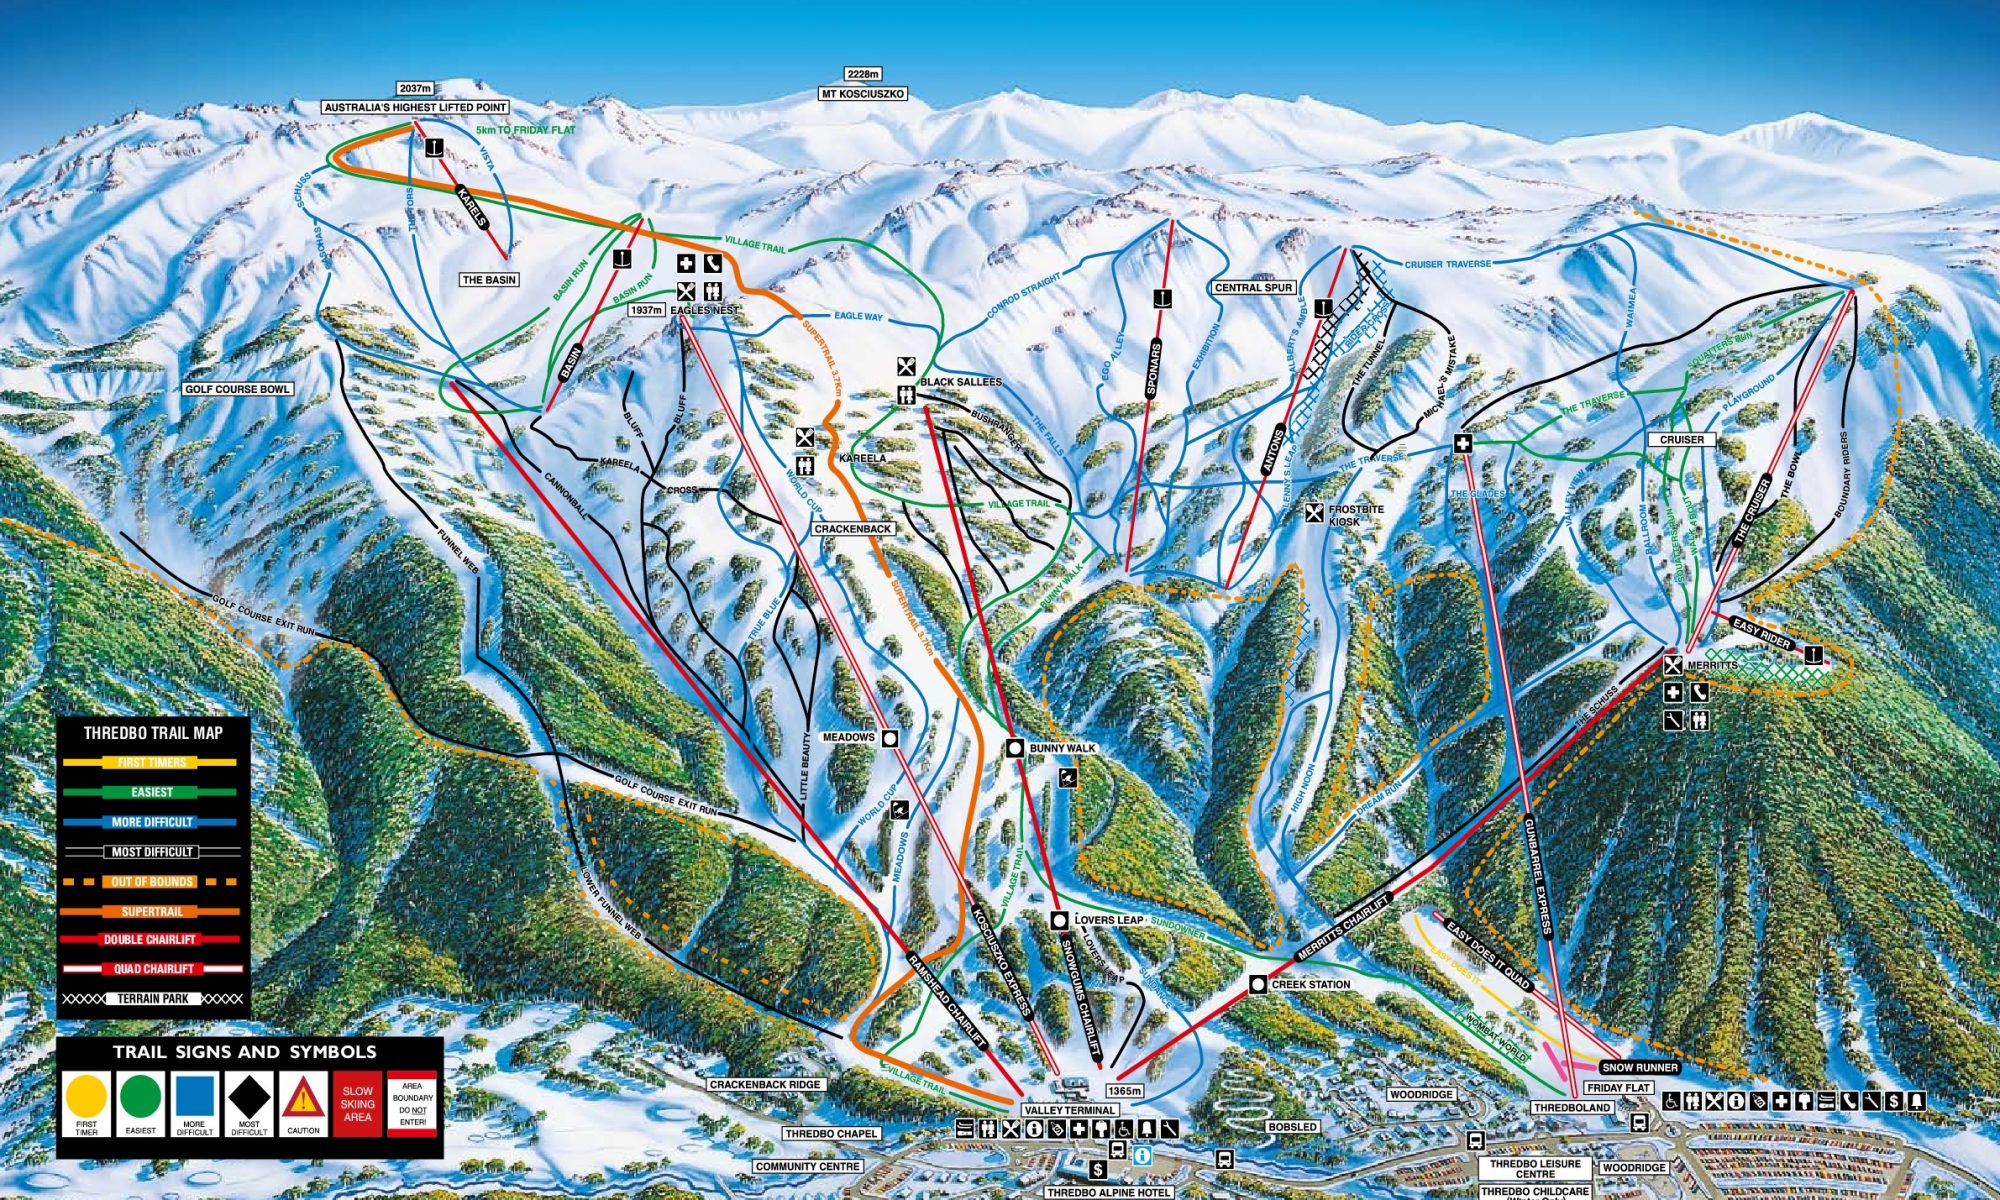 Threbdo Ski Map. Skier falls from chairlift in Threbdo after becoming dislodged due to strong winds.